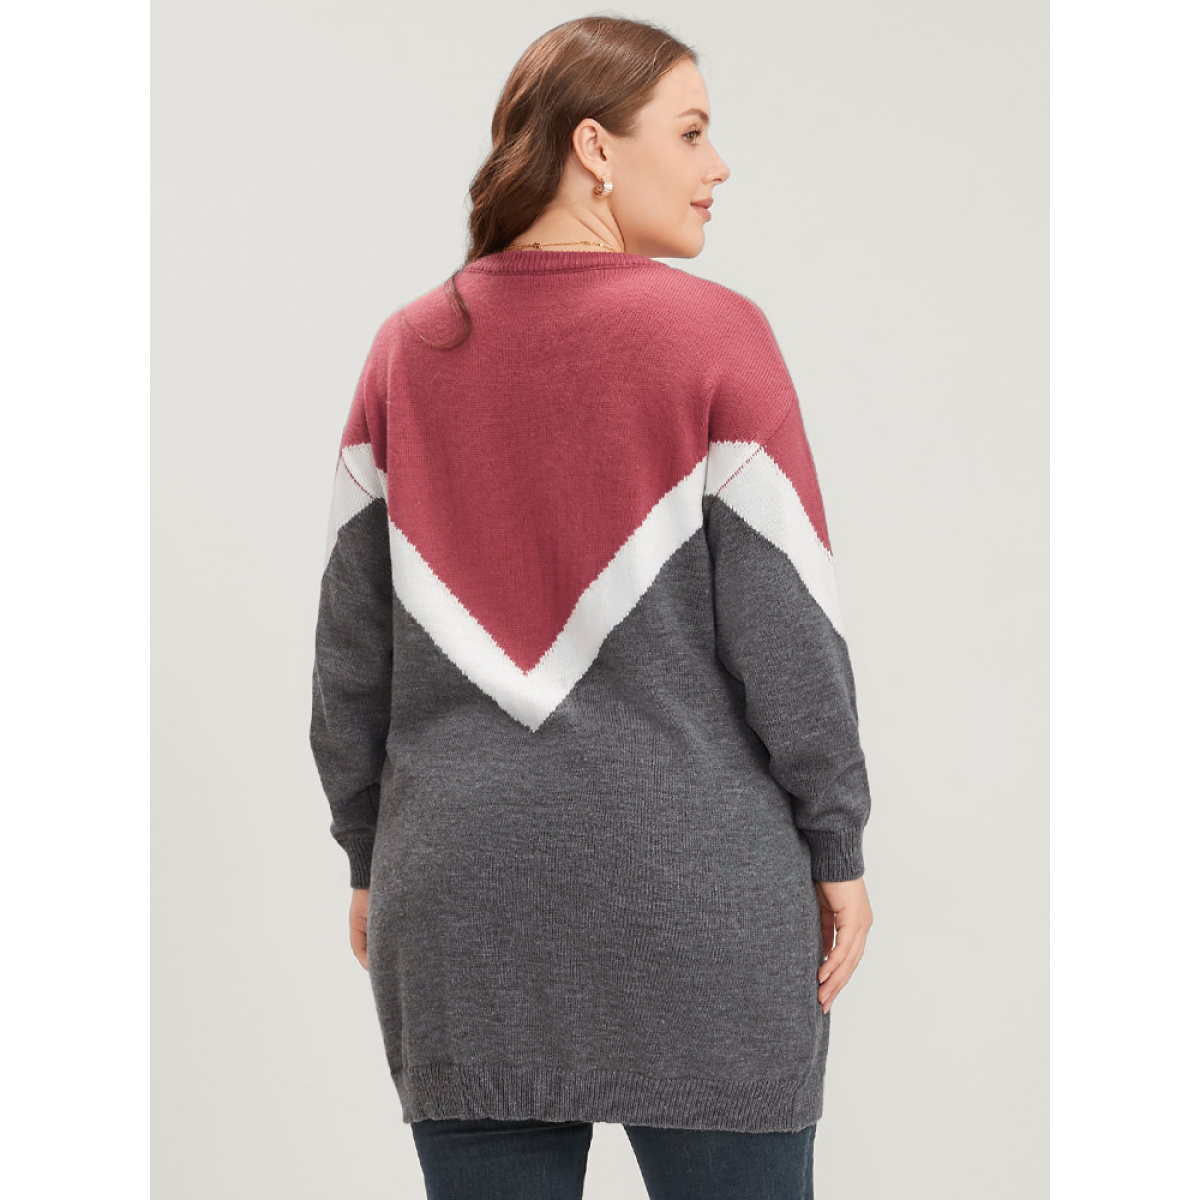 

Plus Size Colorblock Contrast Pointelle Knit Round Neck Mid Long Knit Top Burgundy Women Casual Loose Long Sleeve Round Neck Everyday Pullovers BloomChic